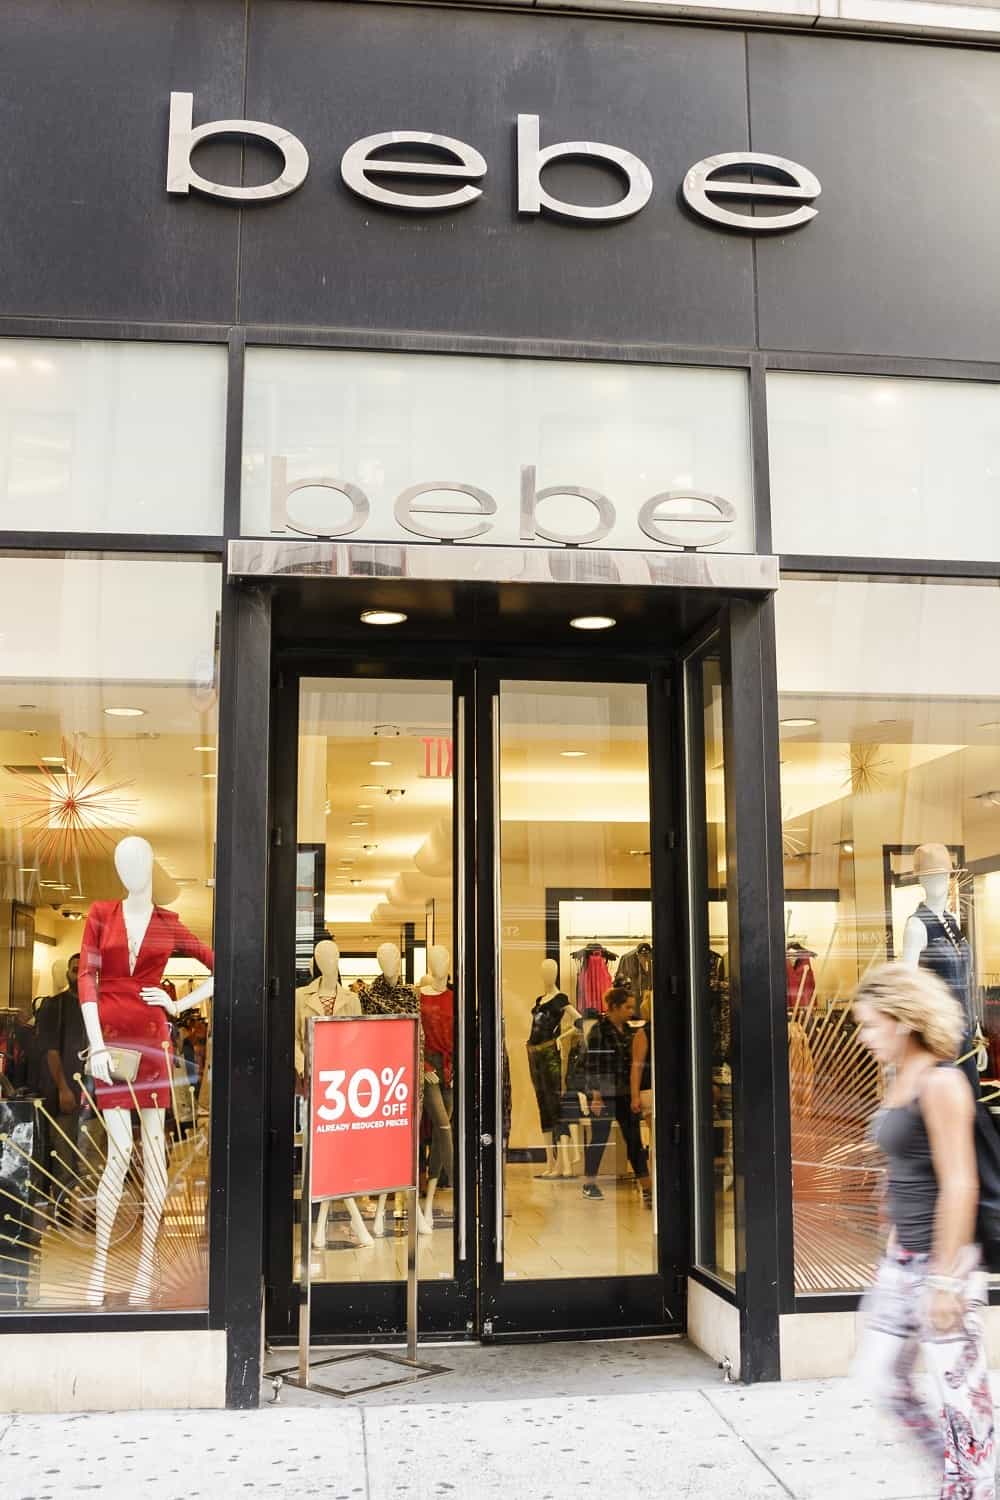 Bebe will close its stores and become an online-only brand